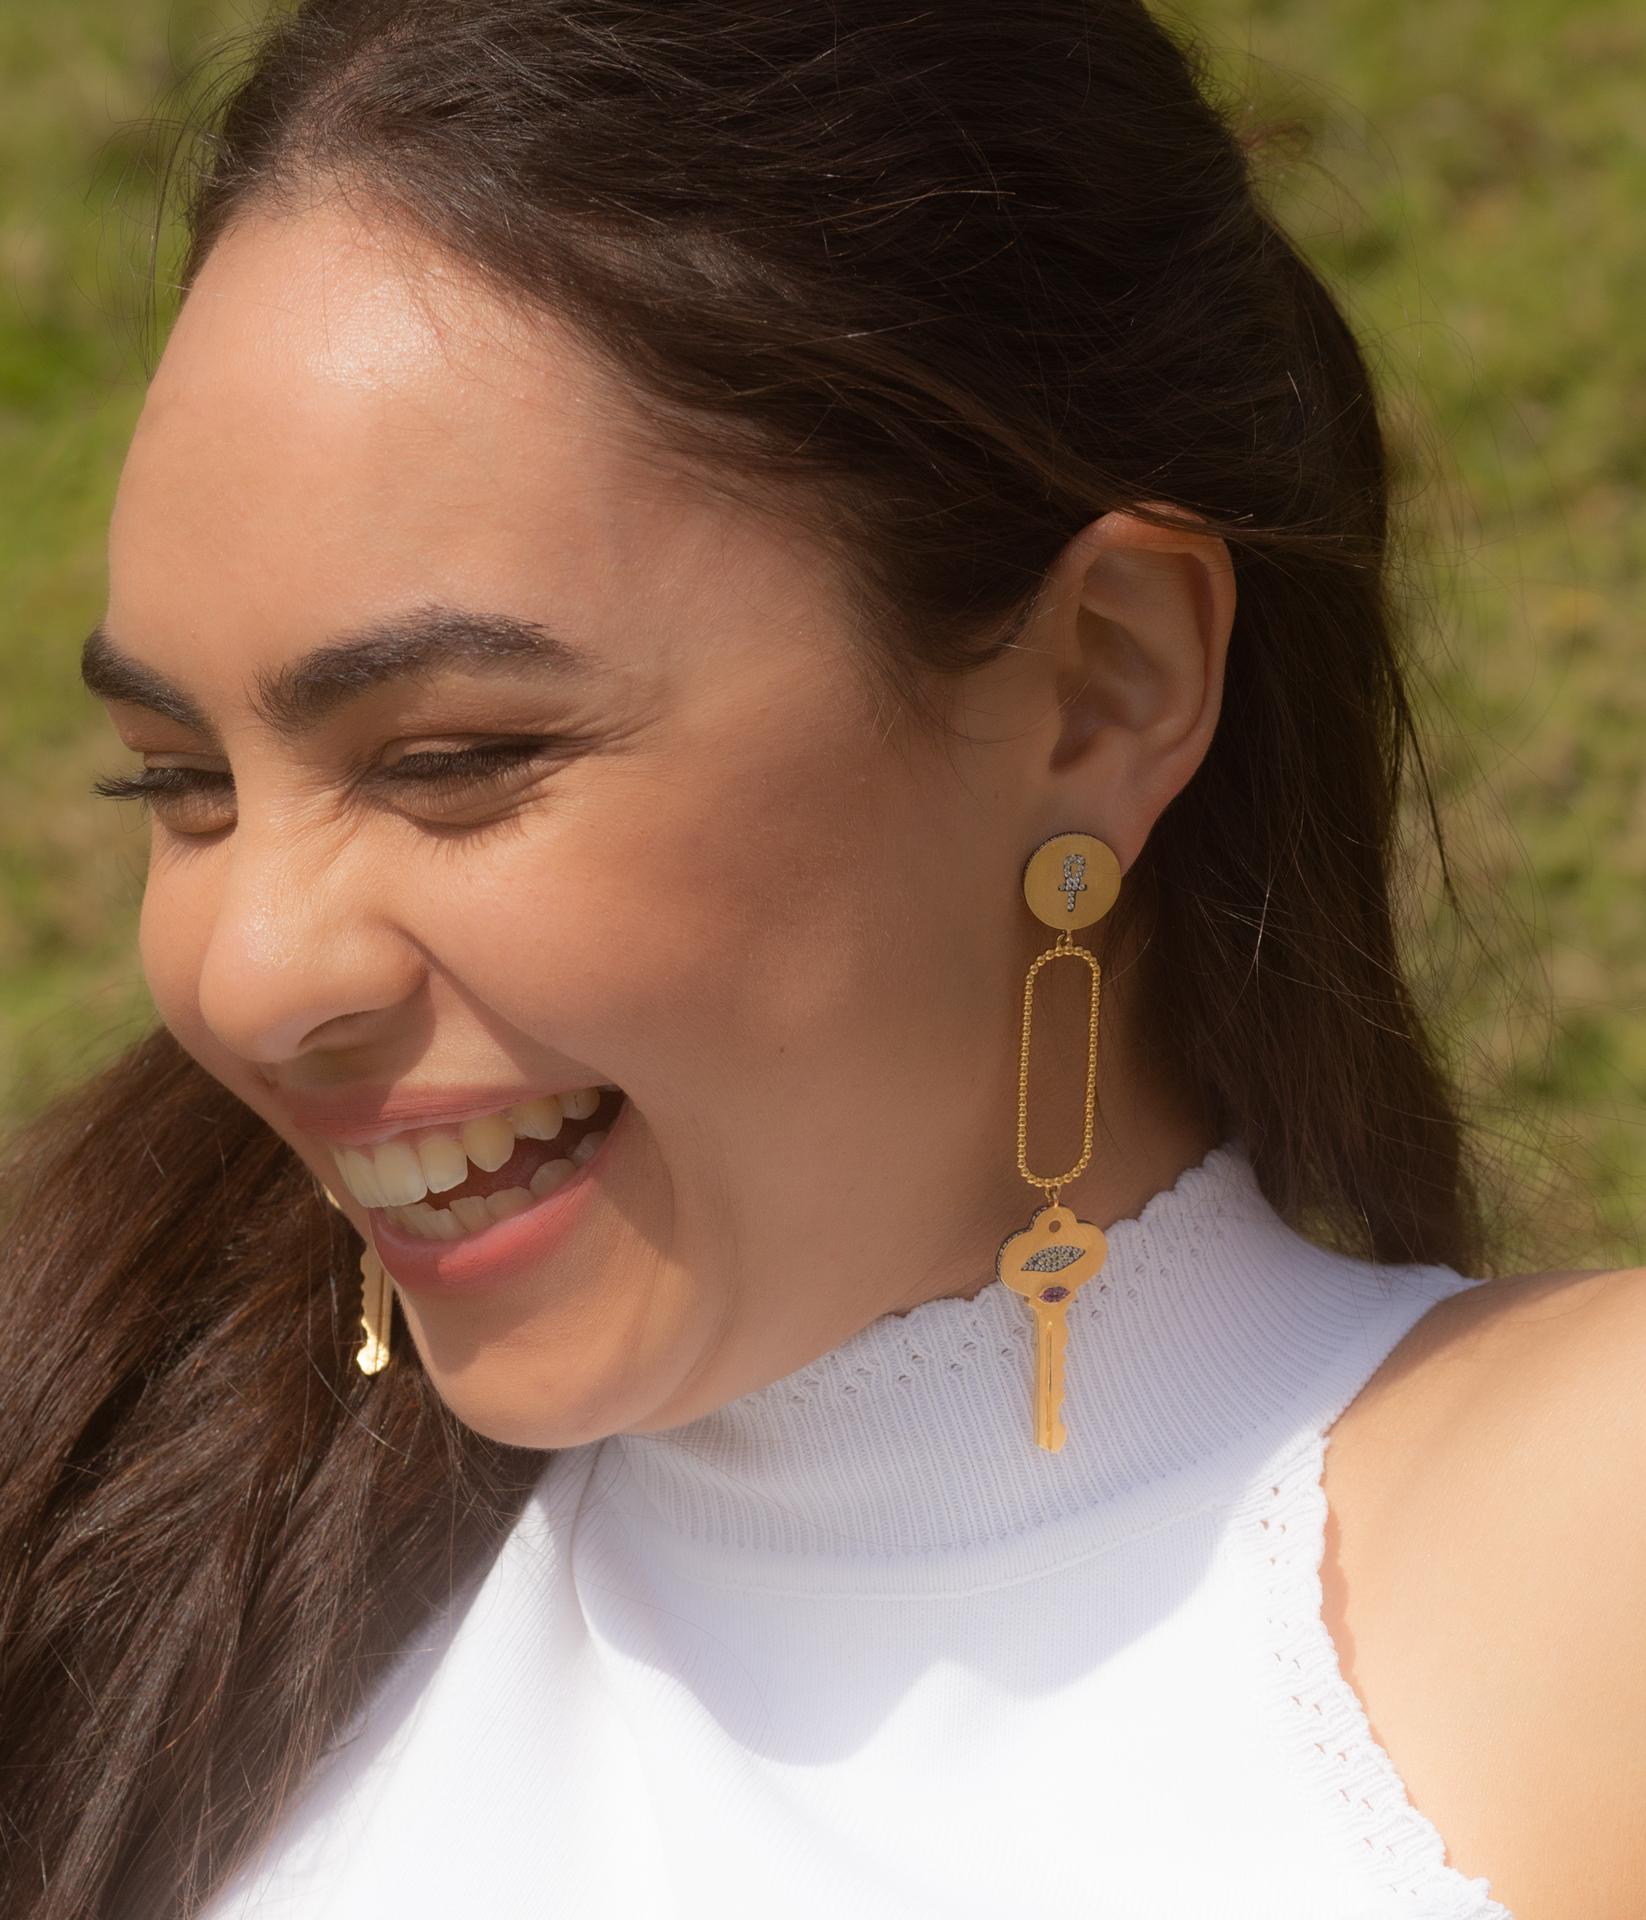 Contemporary Ammanii Key Earrings with Ankh Amulet in Vermeil Gold For Sale